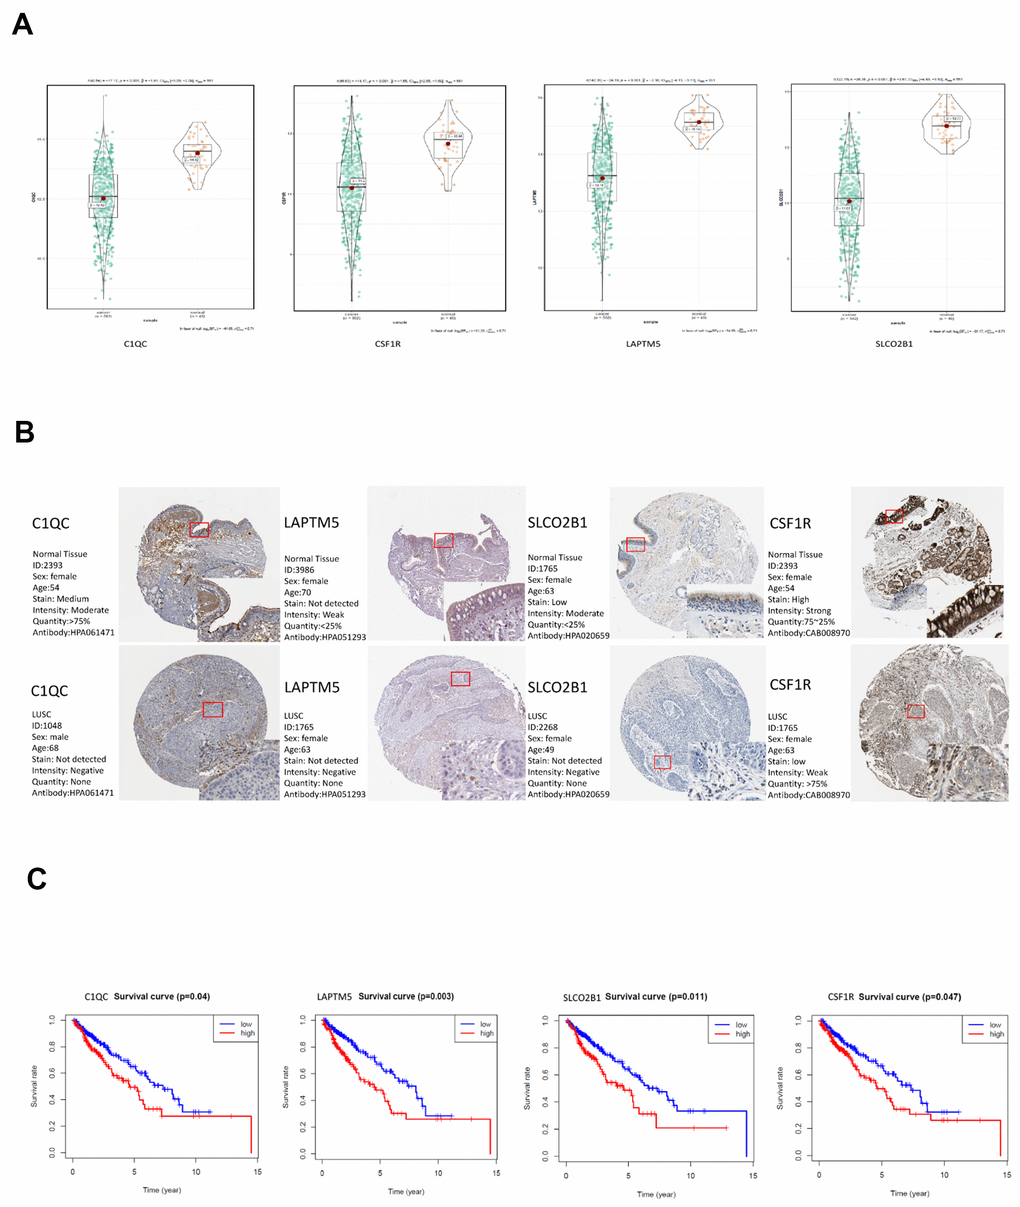 Validation of the four hub genes in the TCGA-LUSC dataset. (A) The expression levels of LAPTM5, CSF1R, SLCO2B1 and C1QC mRNA in the TCGA-LUSC and adjacent normal lung tissue samples. (B) The expression levels of LAPTM5, CSF1R, SLCO2B1 and C1QC proteins in the LUSC and normal lung tissue samples based on the IHC data in The Human Protein Atlas database. (C) Correlation analysis of the mRNA expression levels of the 4 hub genes, LAPTM5, CSF1R, SLCO2B1 and C1QC in the LUSC tissues and the overall survival time of the TCGA-LUSC patients. The red line indicates TCGA-LUSC samples with high expression of the 4 hub genes (above the best-separation value, n=157), and the blue line denotes the TCGA-LUSC samples with low expression of the 4 hub genes (below best-separation value, n=209).